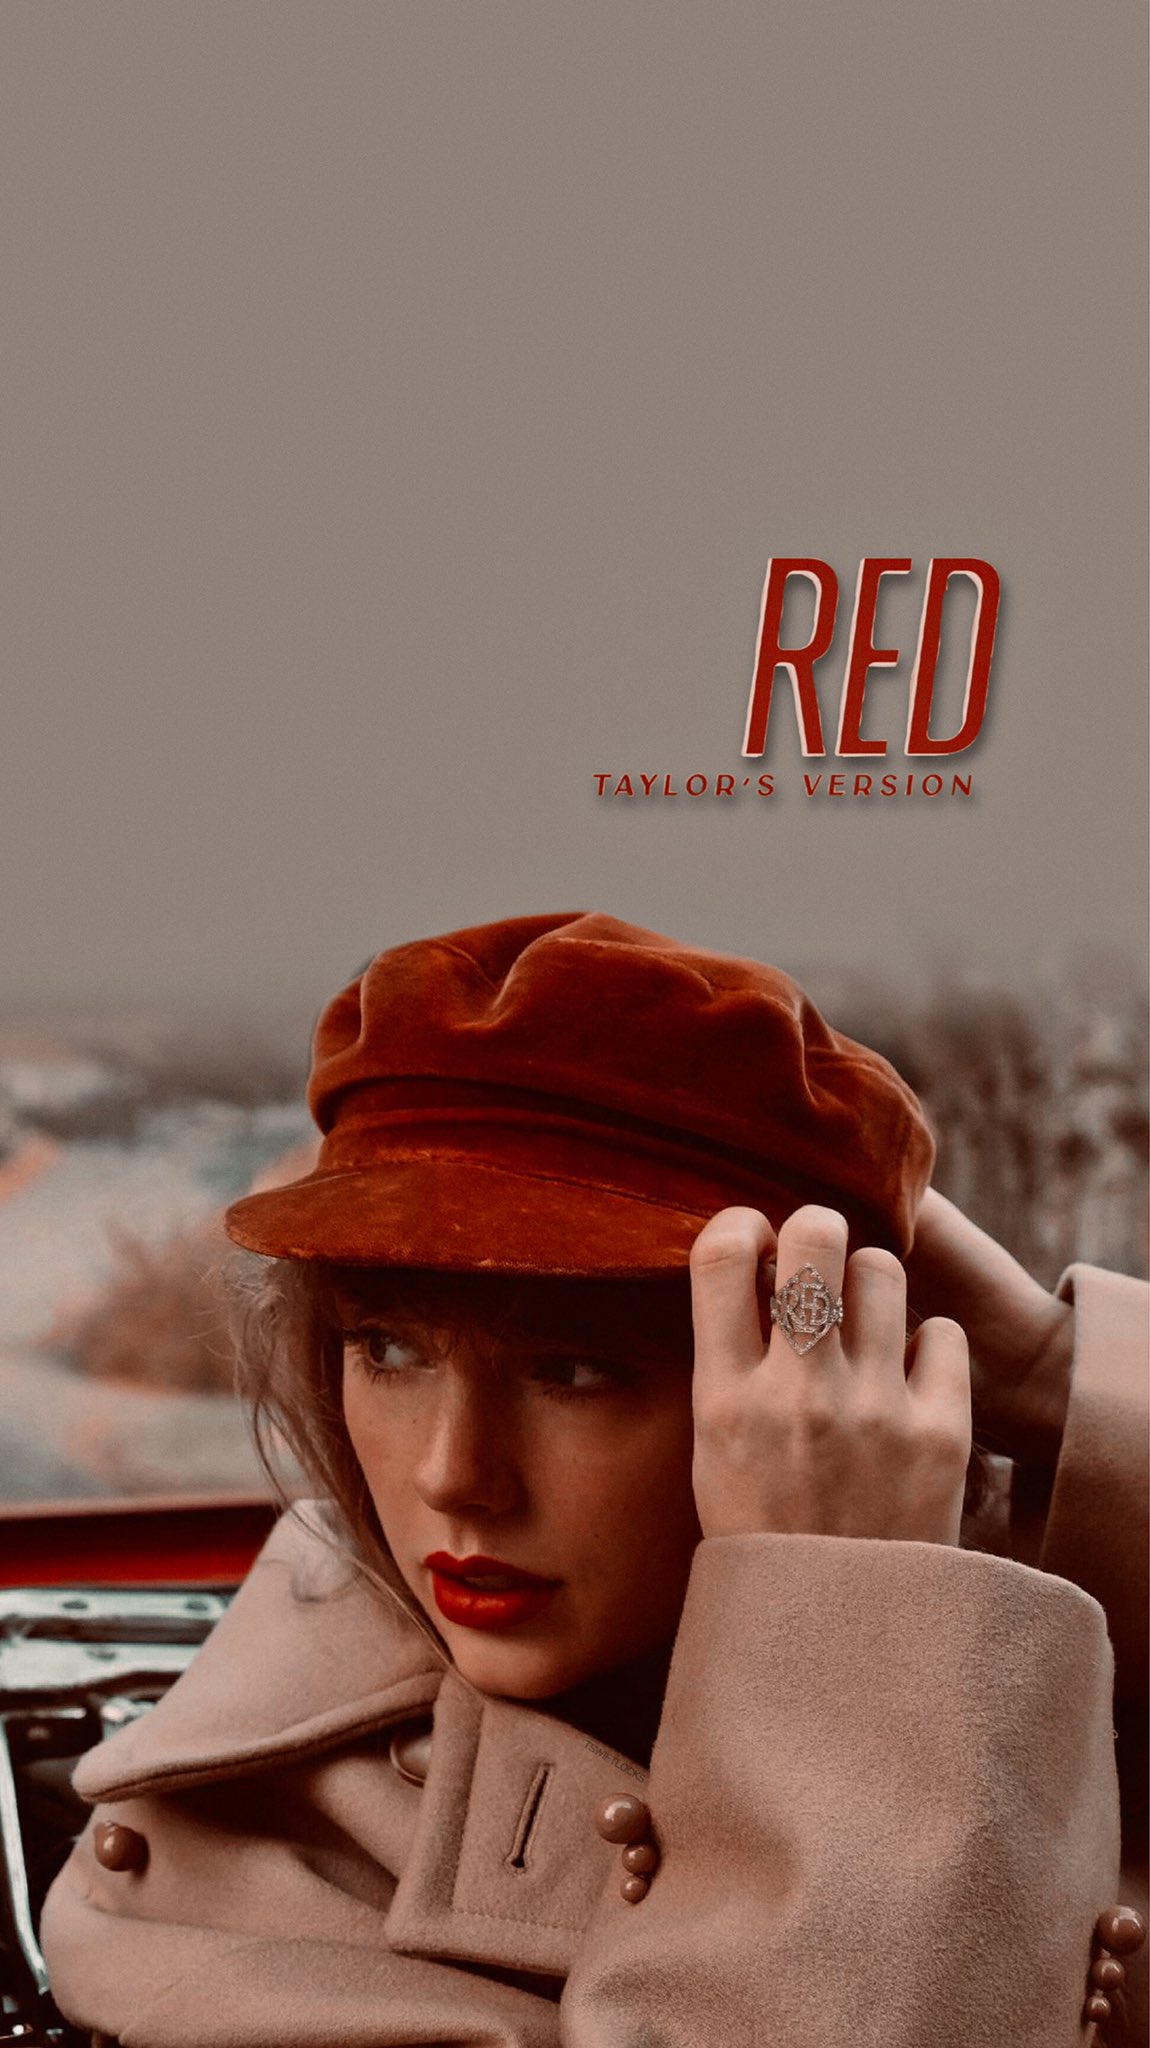 Red Taylor's Version Wallpaper Free Red Taylor's Version Background